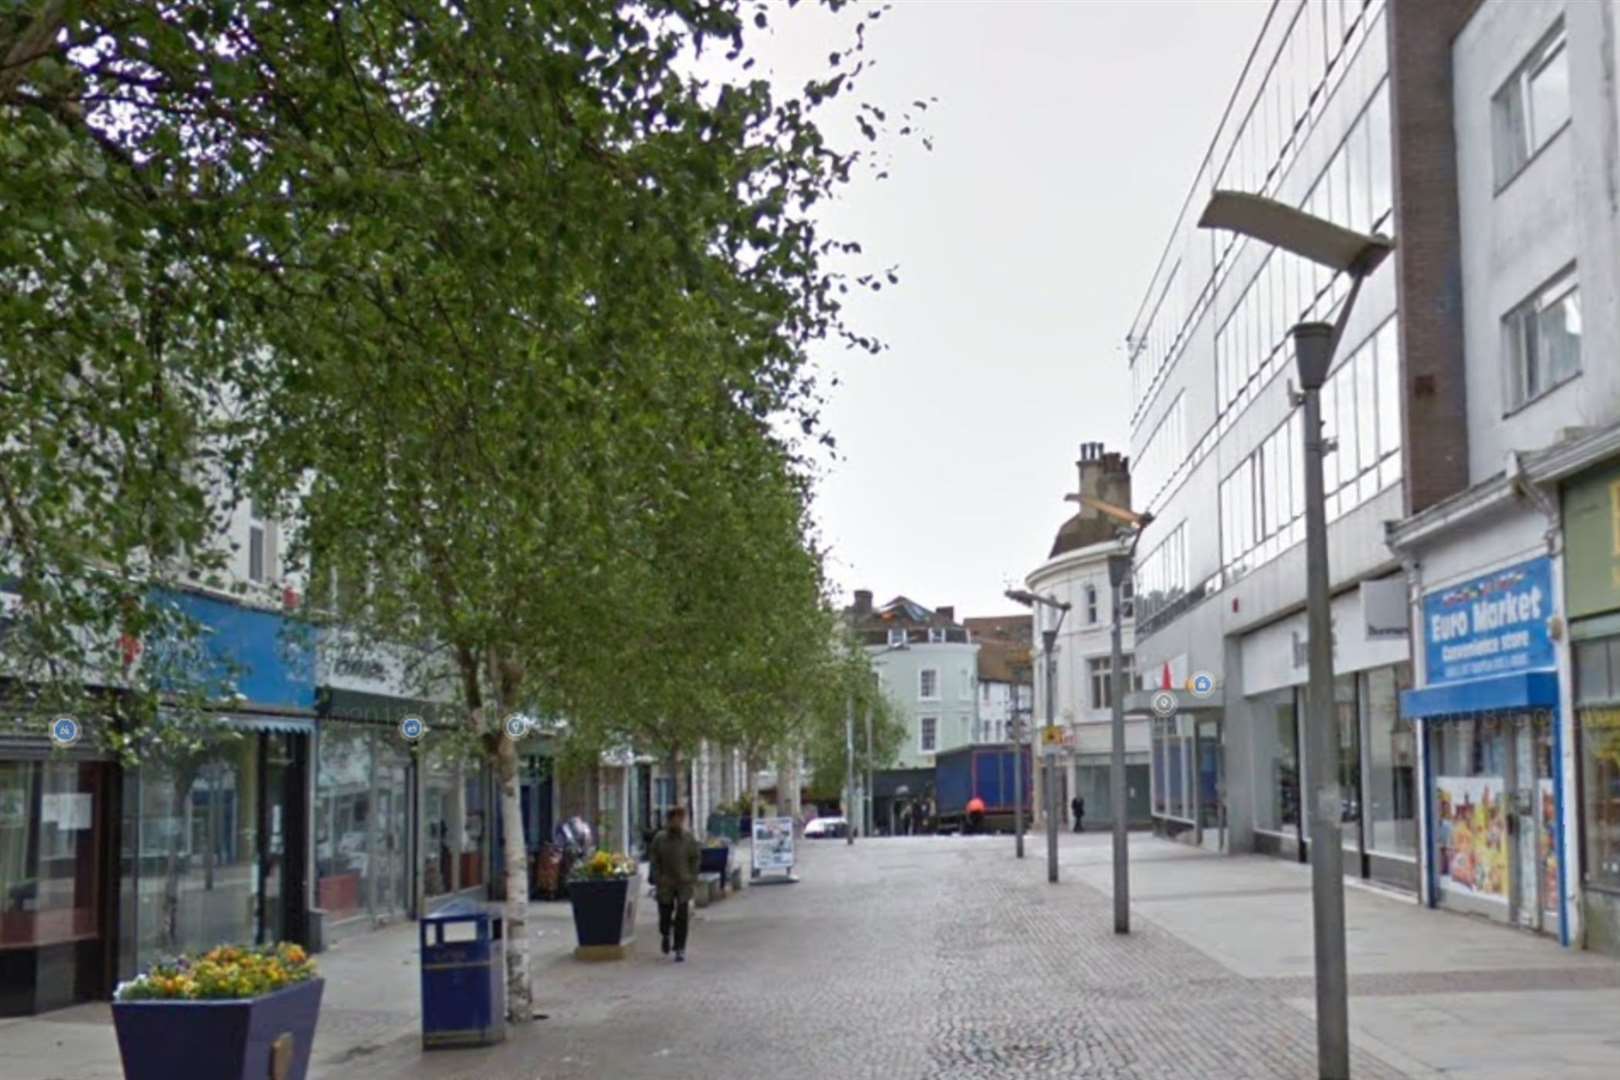 The man from Guildhall Street has been charged with 21 shoplifting offences. Picture: Google Maps